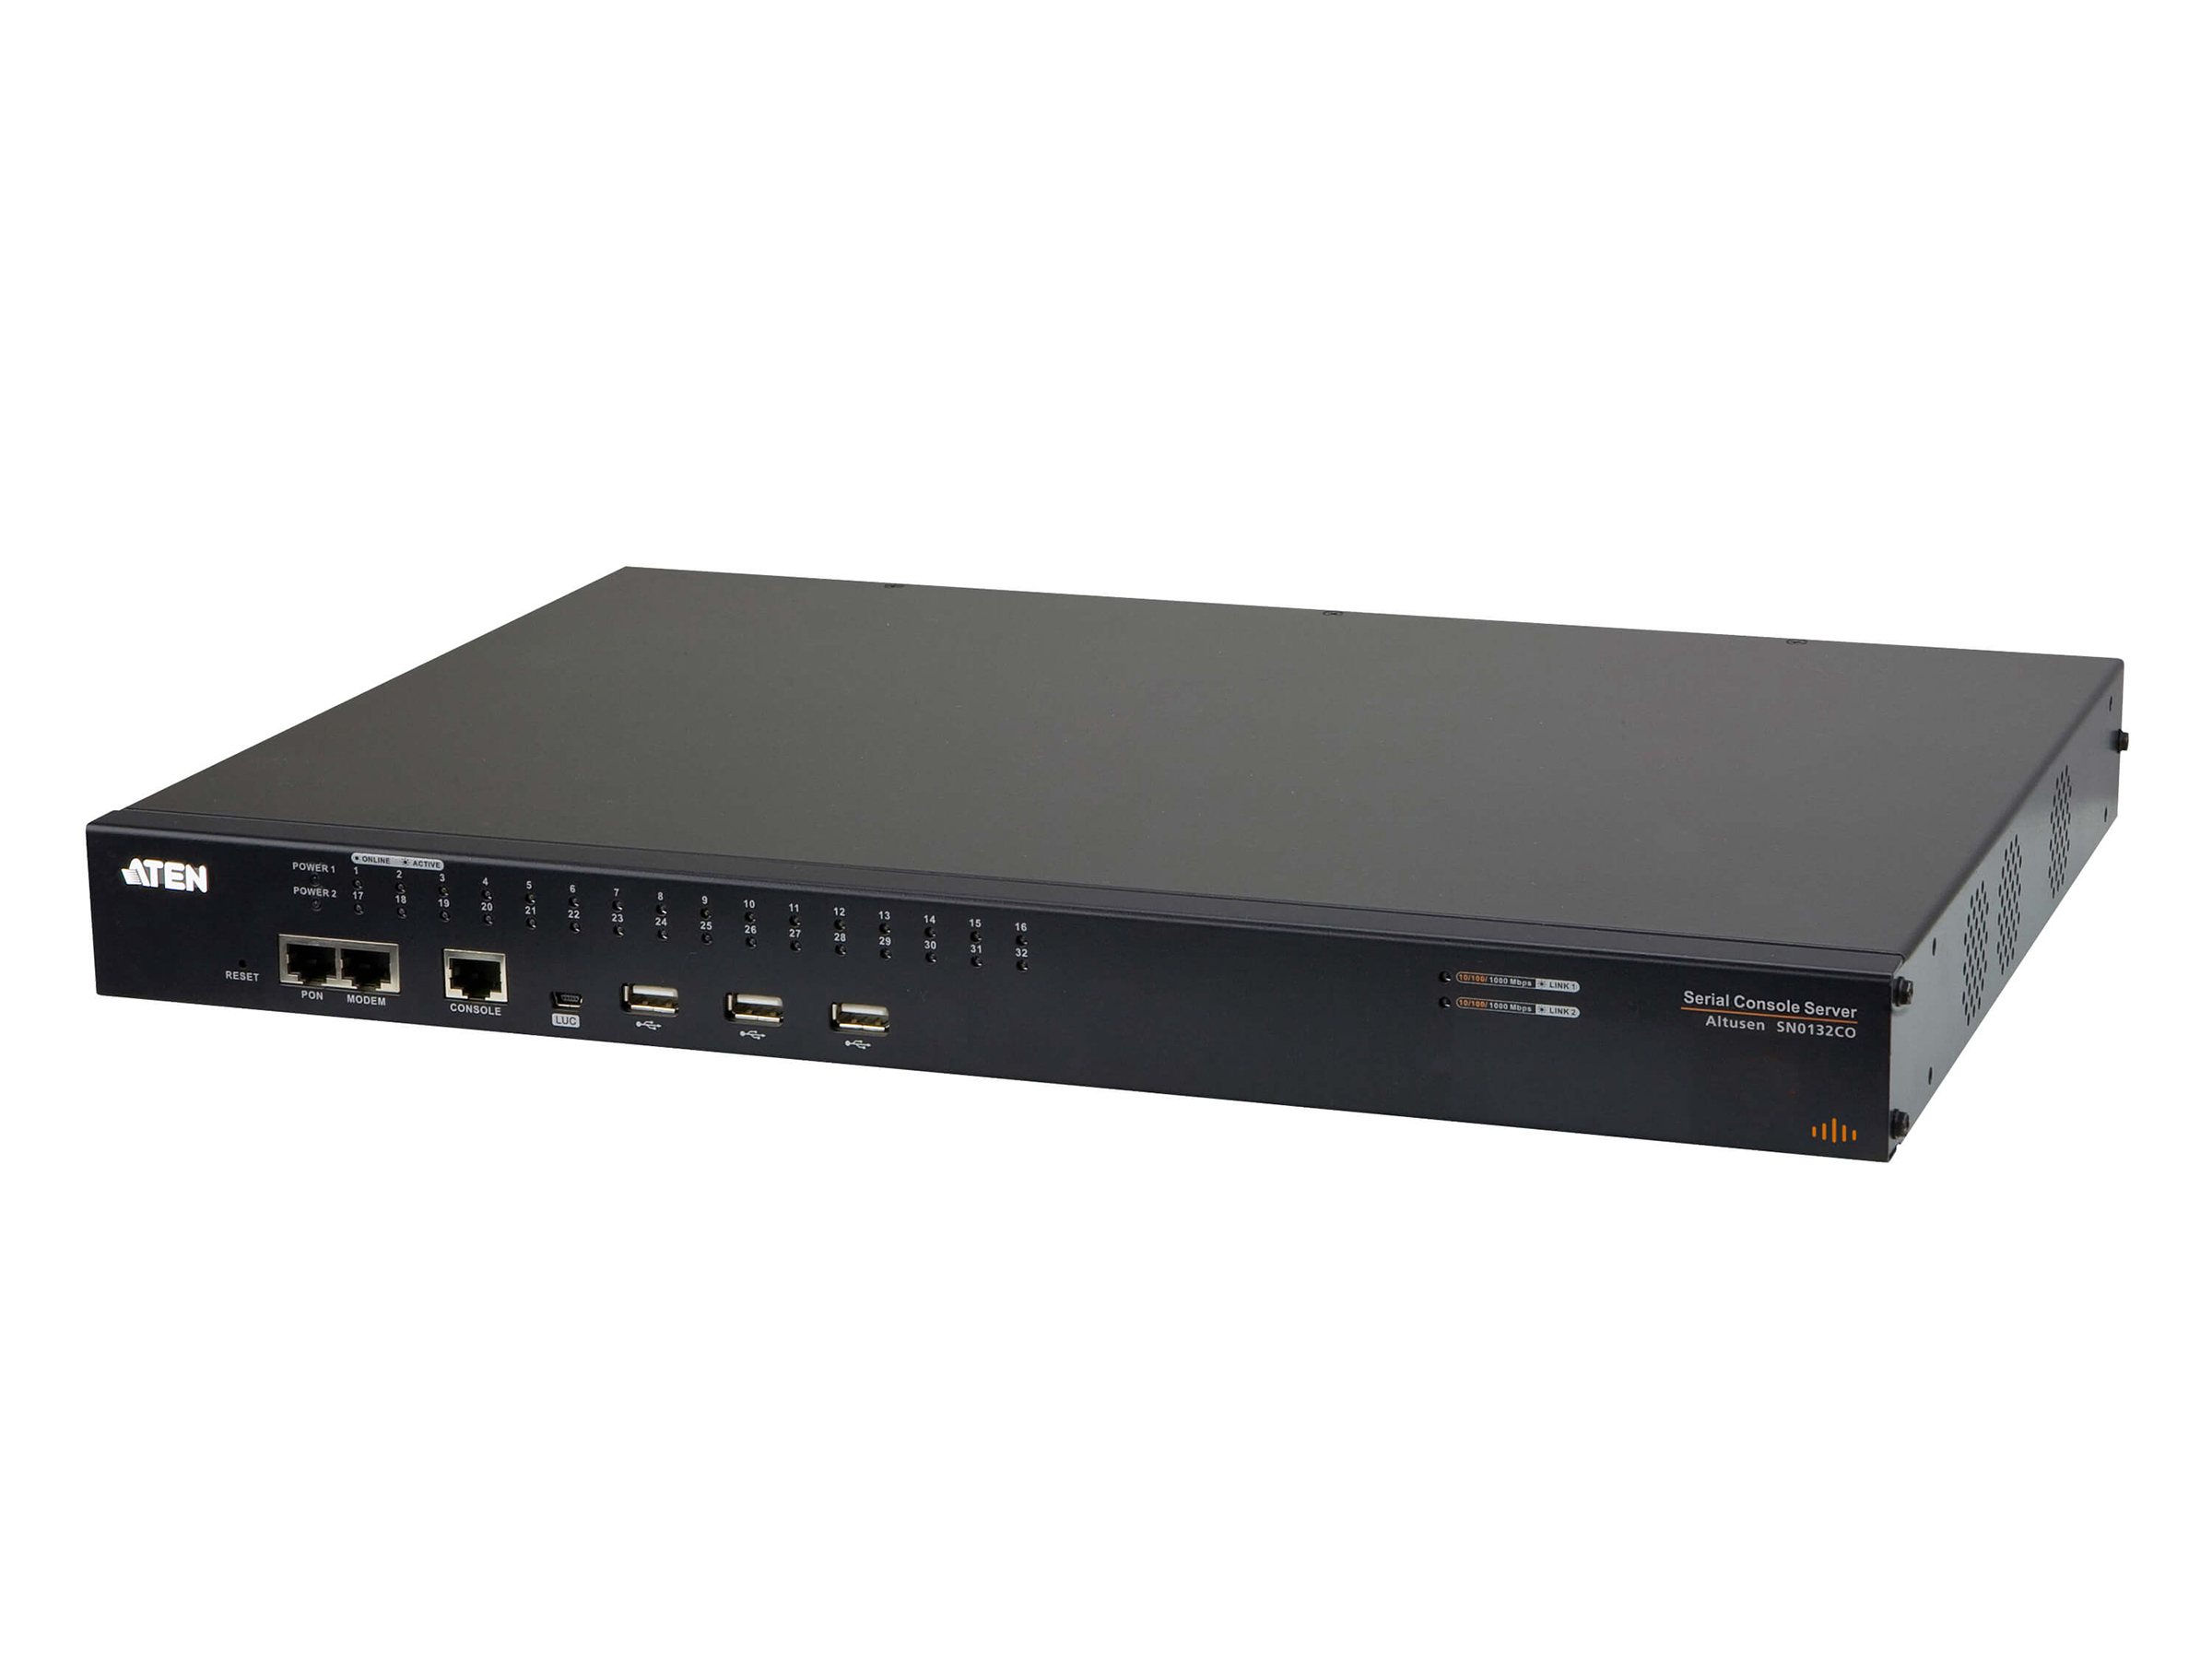 SN0132CO 32-Port Serial Console Server with Dual Power/LAN by Aten